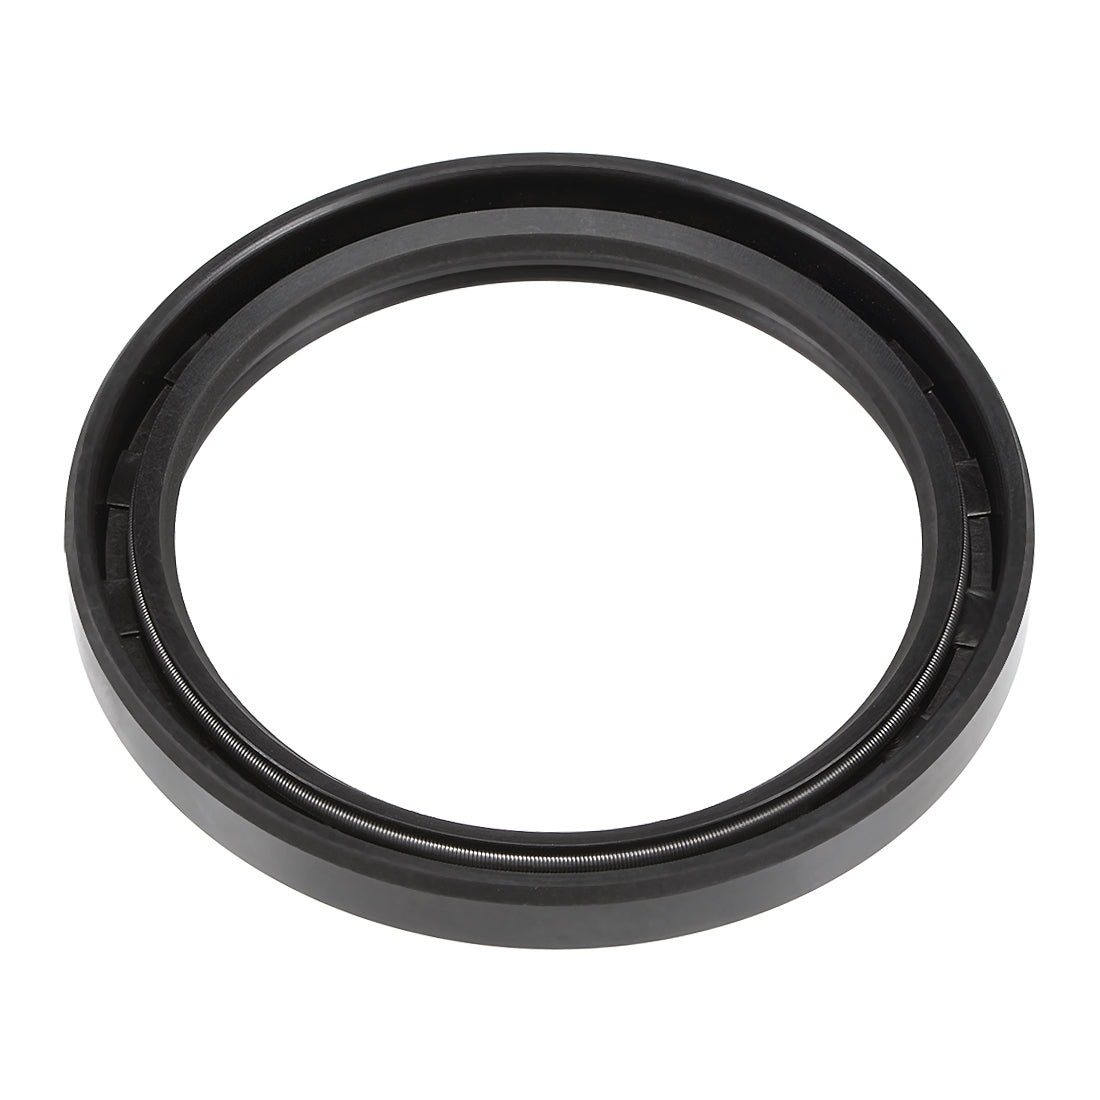 uxcell Uxcell Oil Seal, TC 60mm x 75mm x 8mm, Nitrile Rubber Cover Double Lip